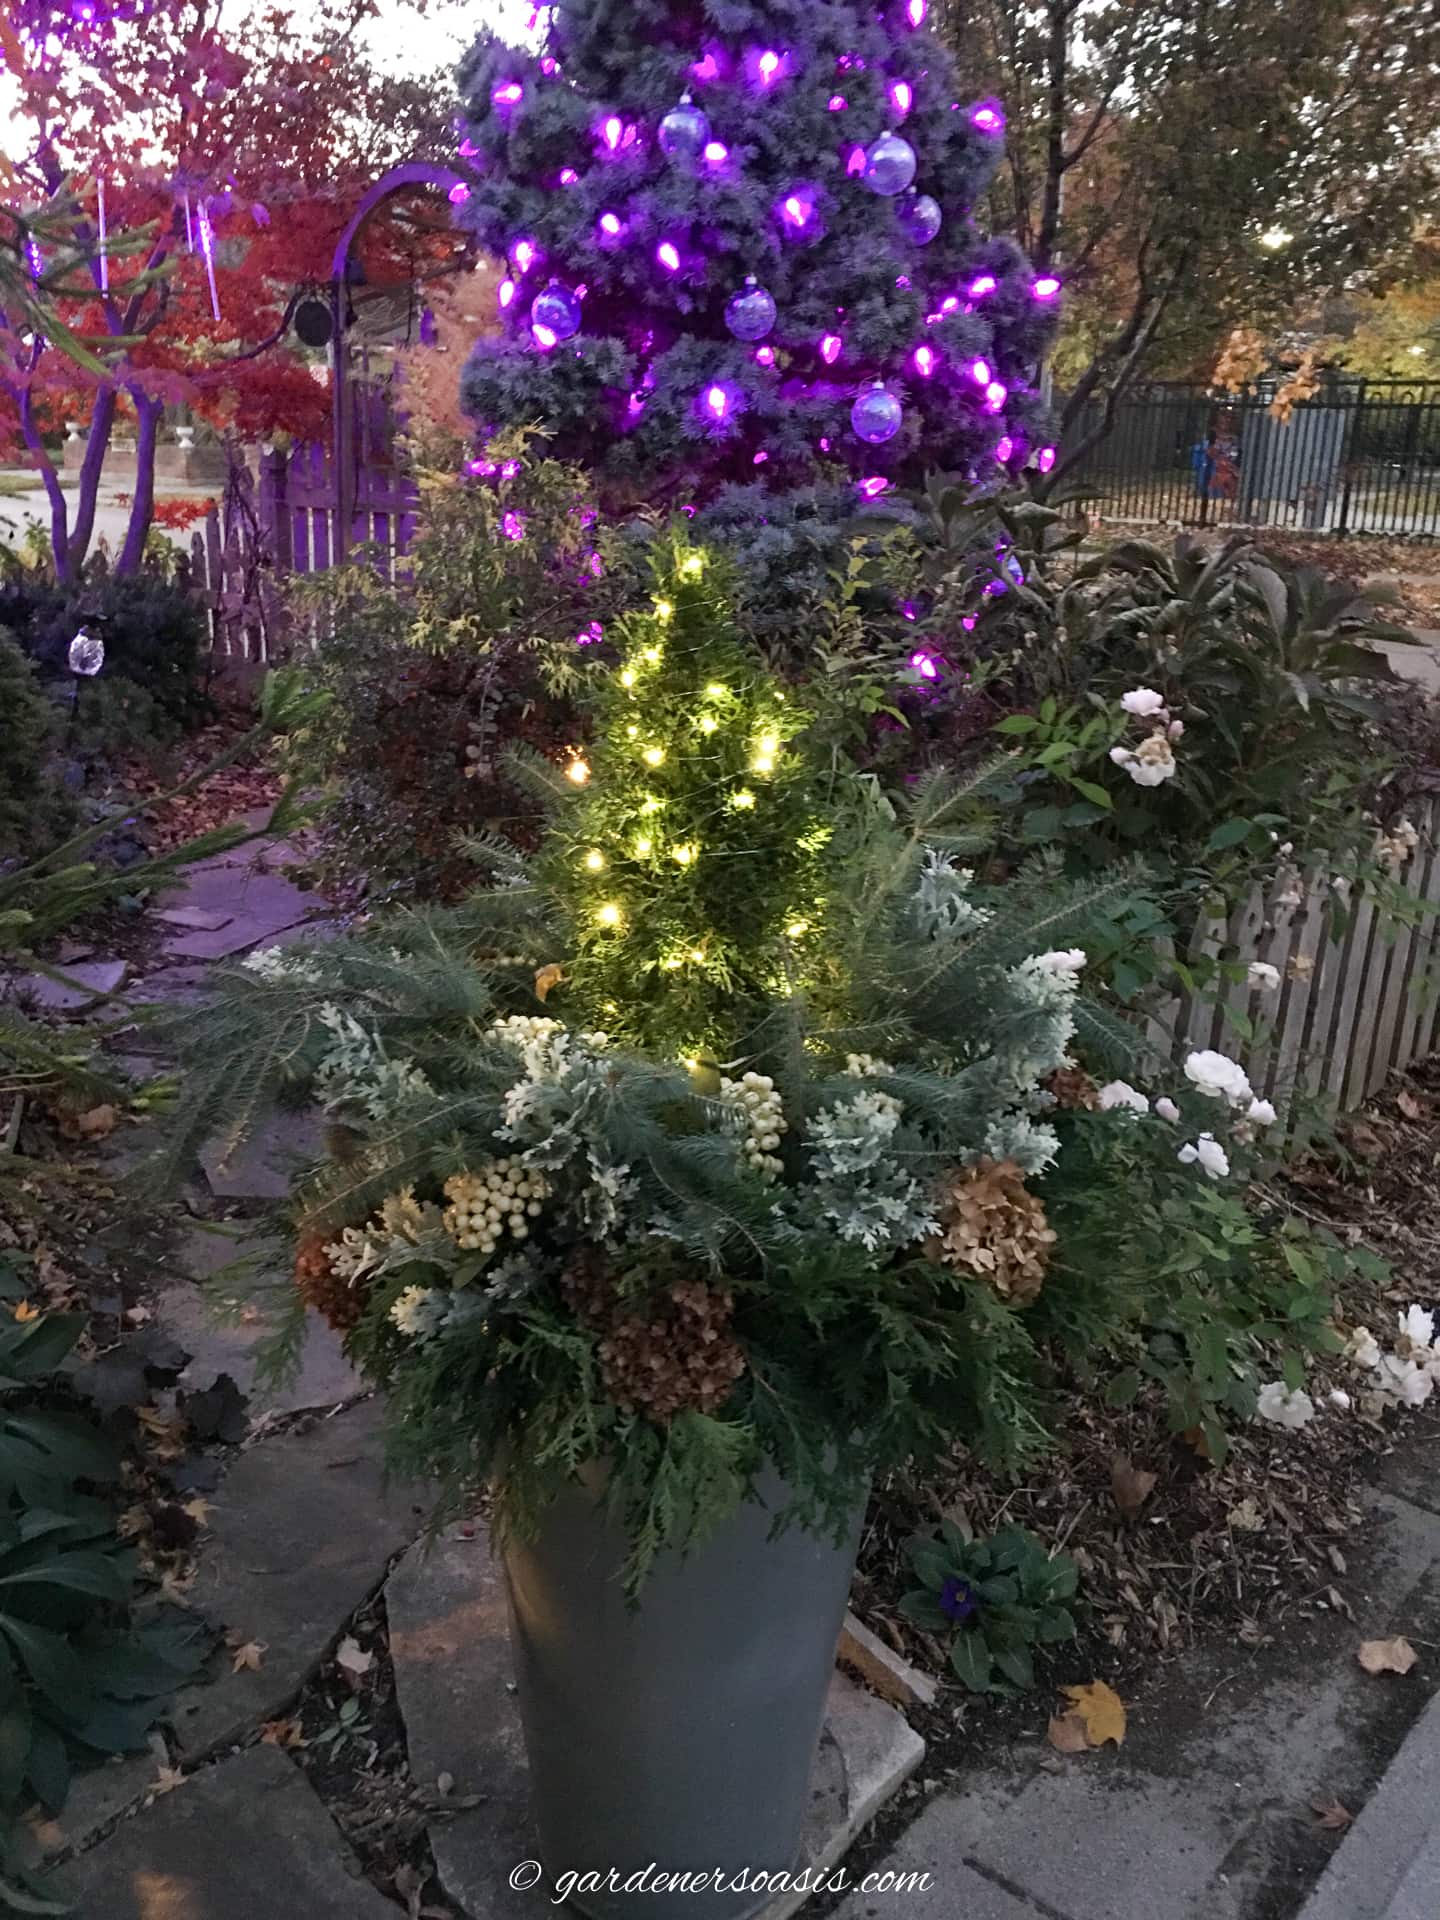 DIY winter planter with white lights in front of a large evergreen with purple lights